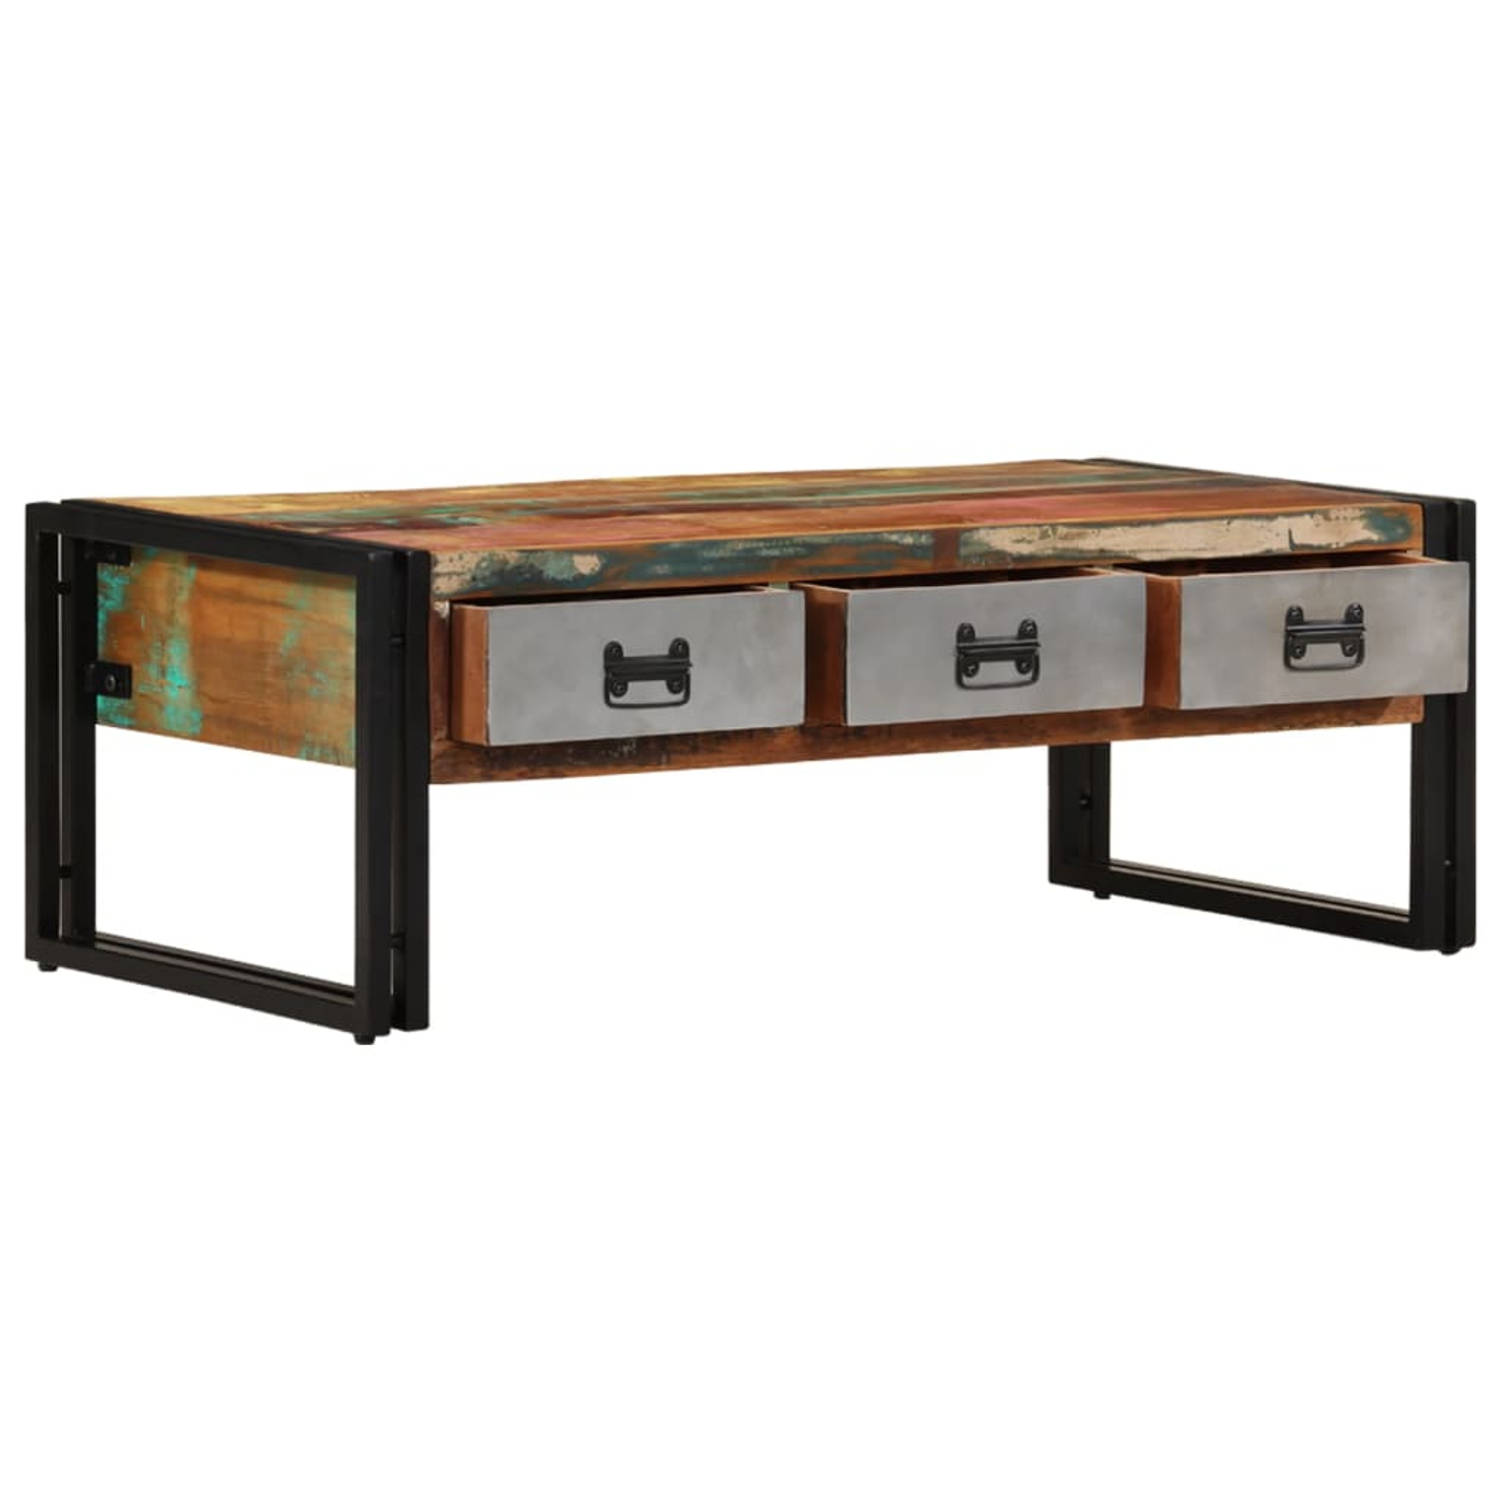 The Living Store Salontafel Vintage Houten 100 x 50 x 35 cm Gerecycled Met 3 lades